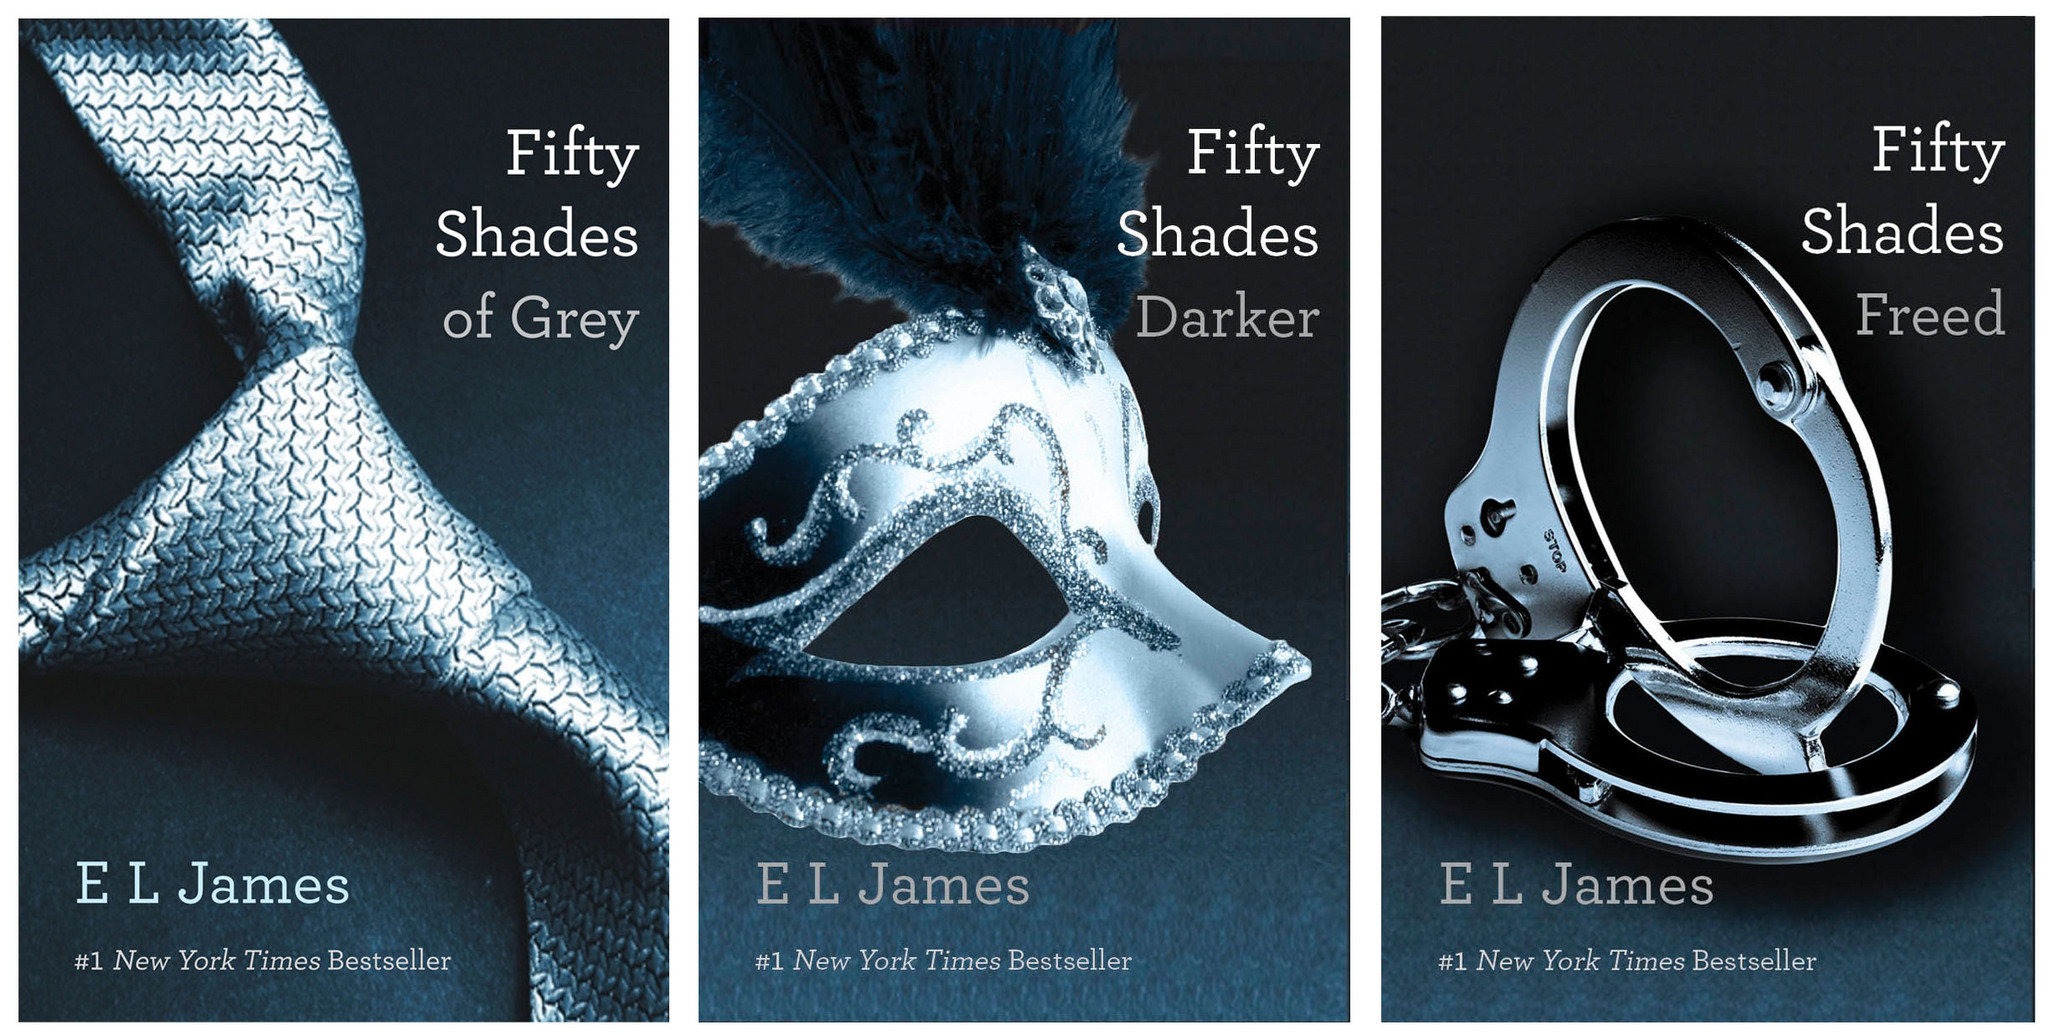 Fifty Shades Might Have Been Good